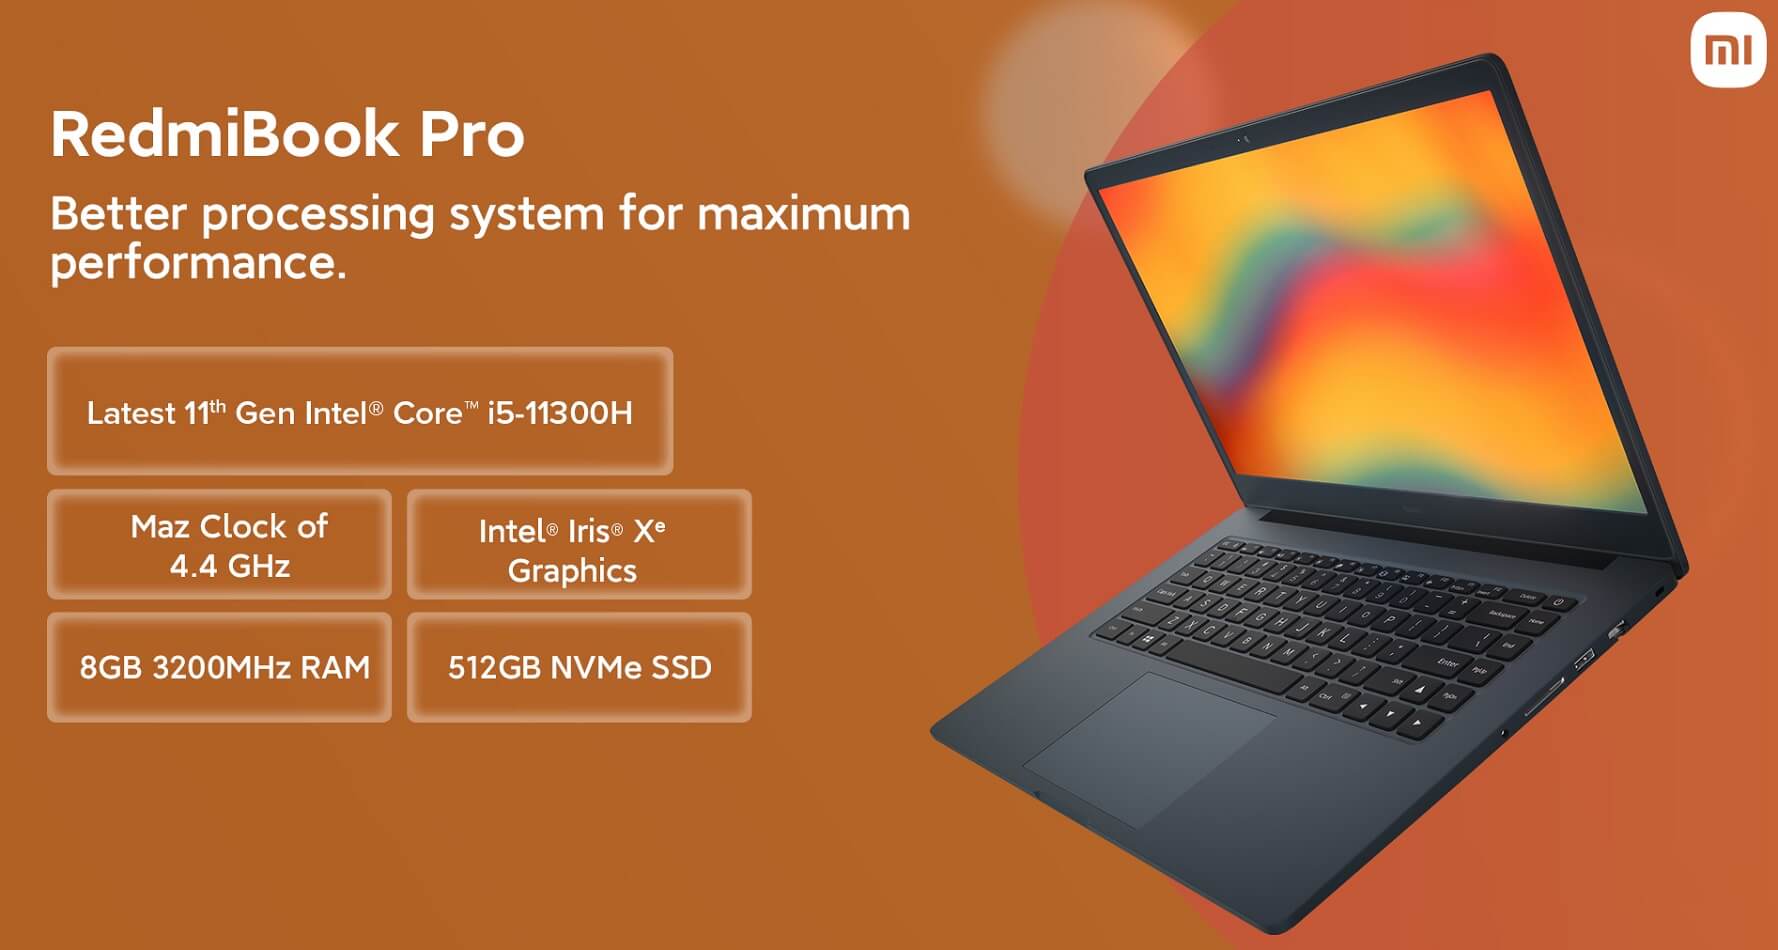 RedmiBook Pro features 1